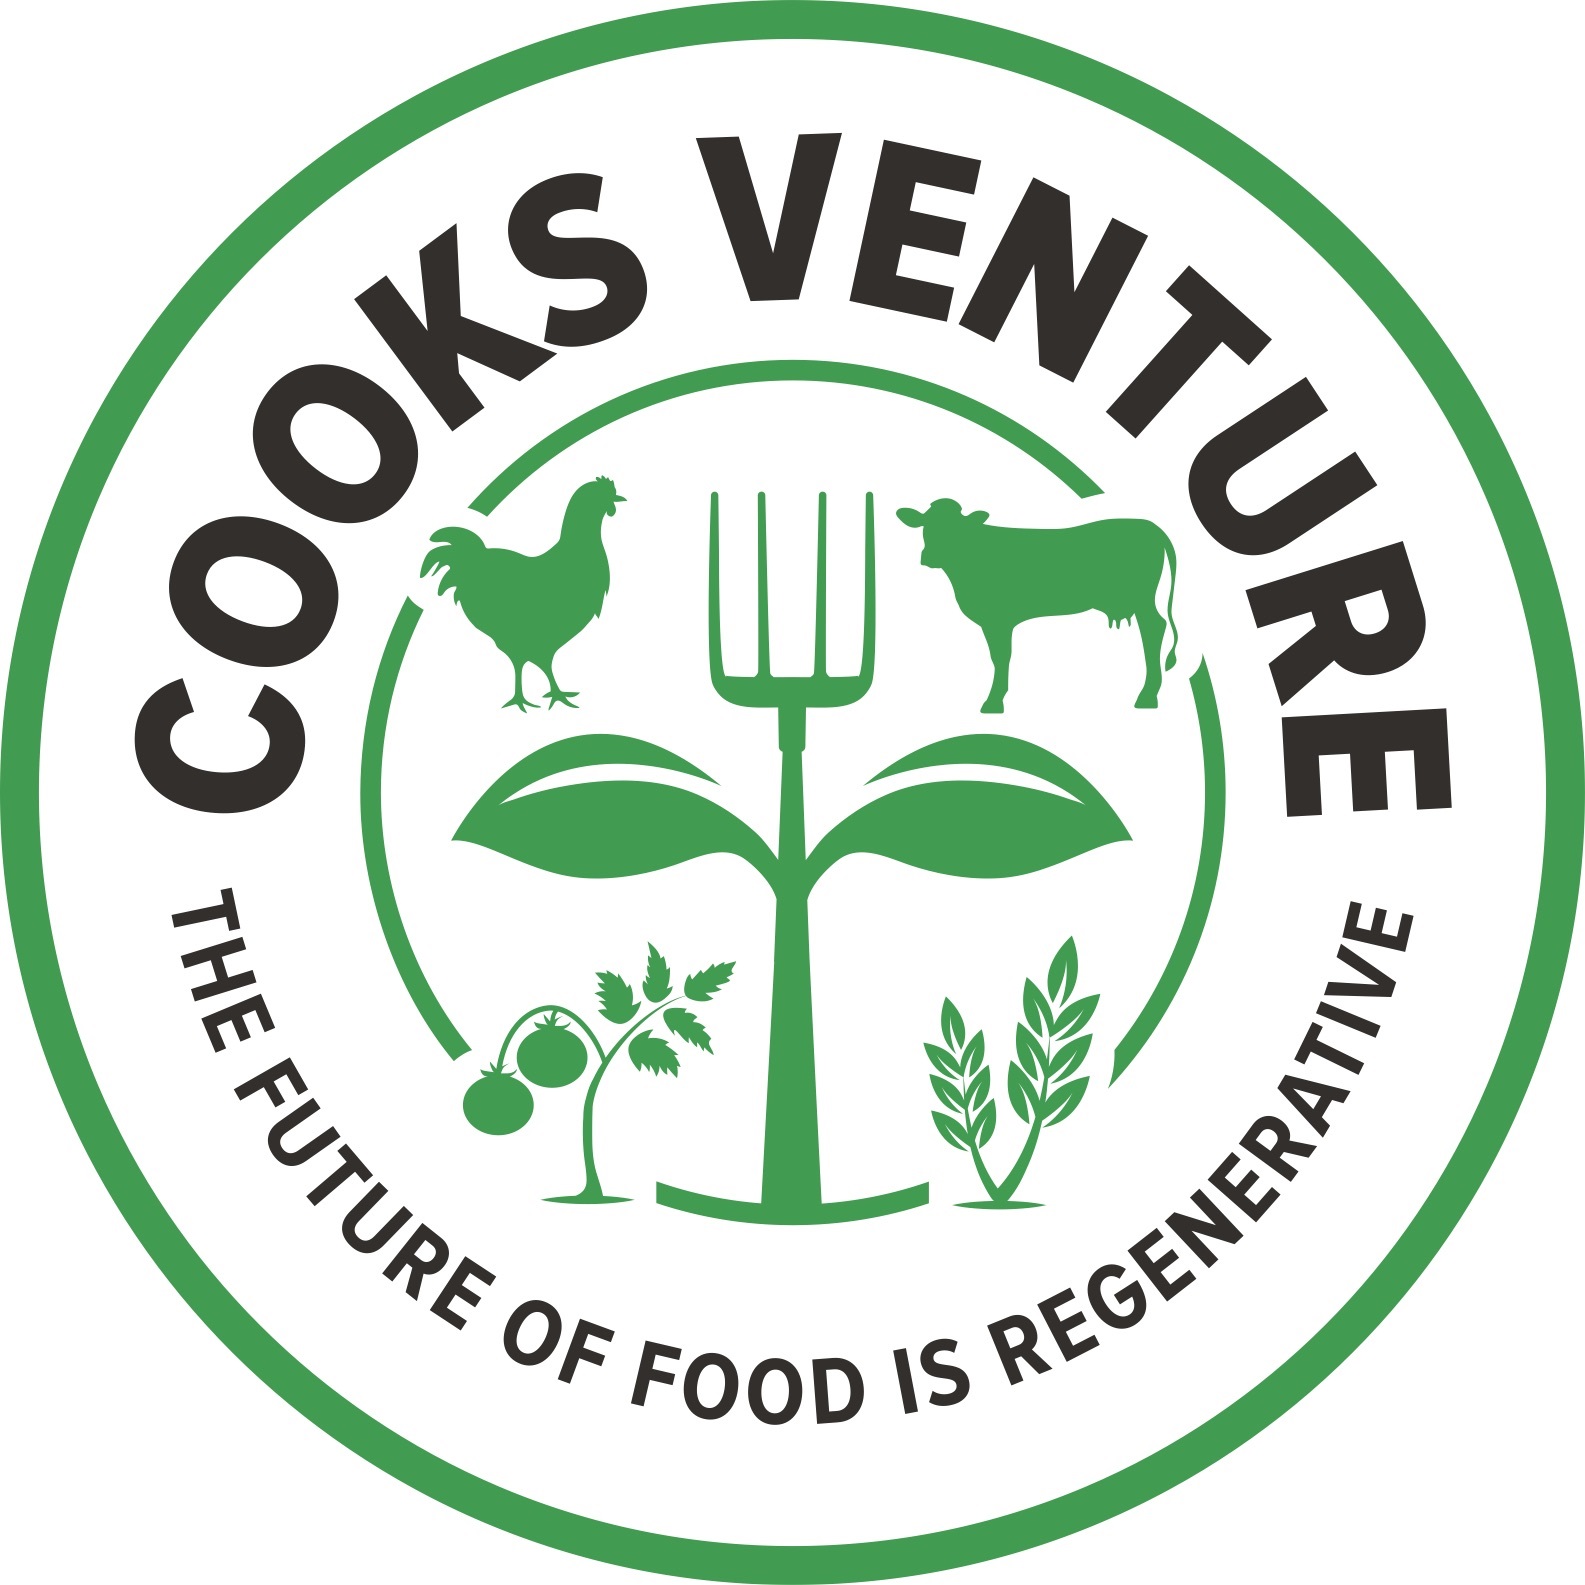 Cook's Venture Poultry